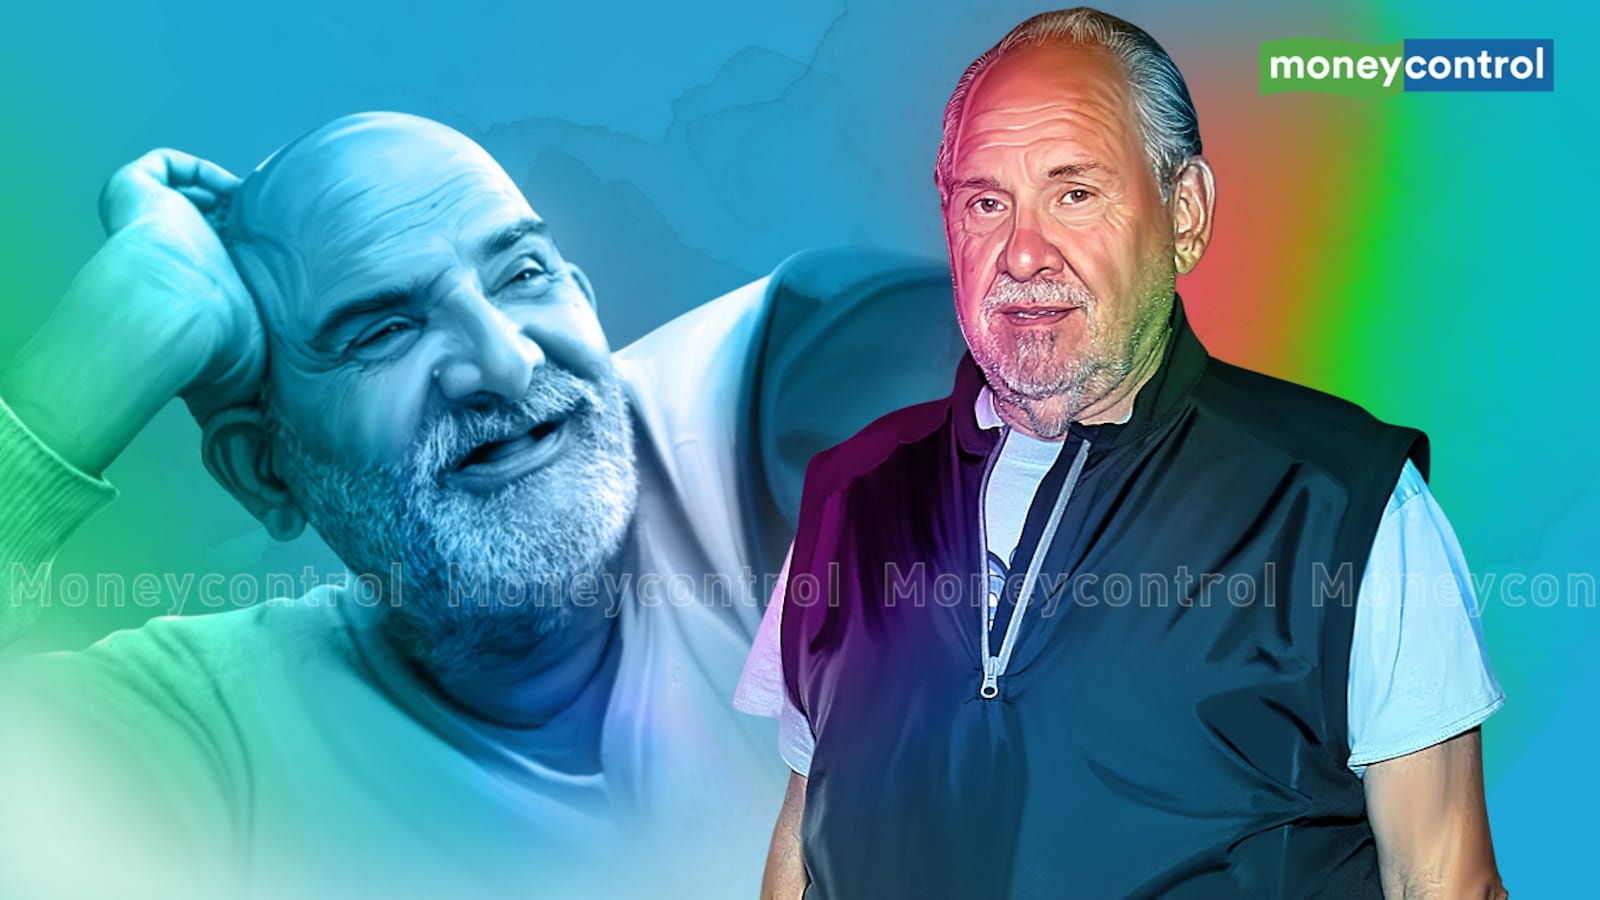 What Neem Karoli Baba and Larry Brilliant taught us in their ...